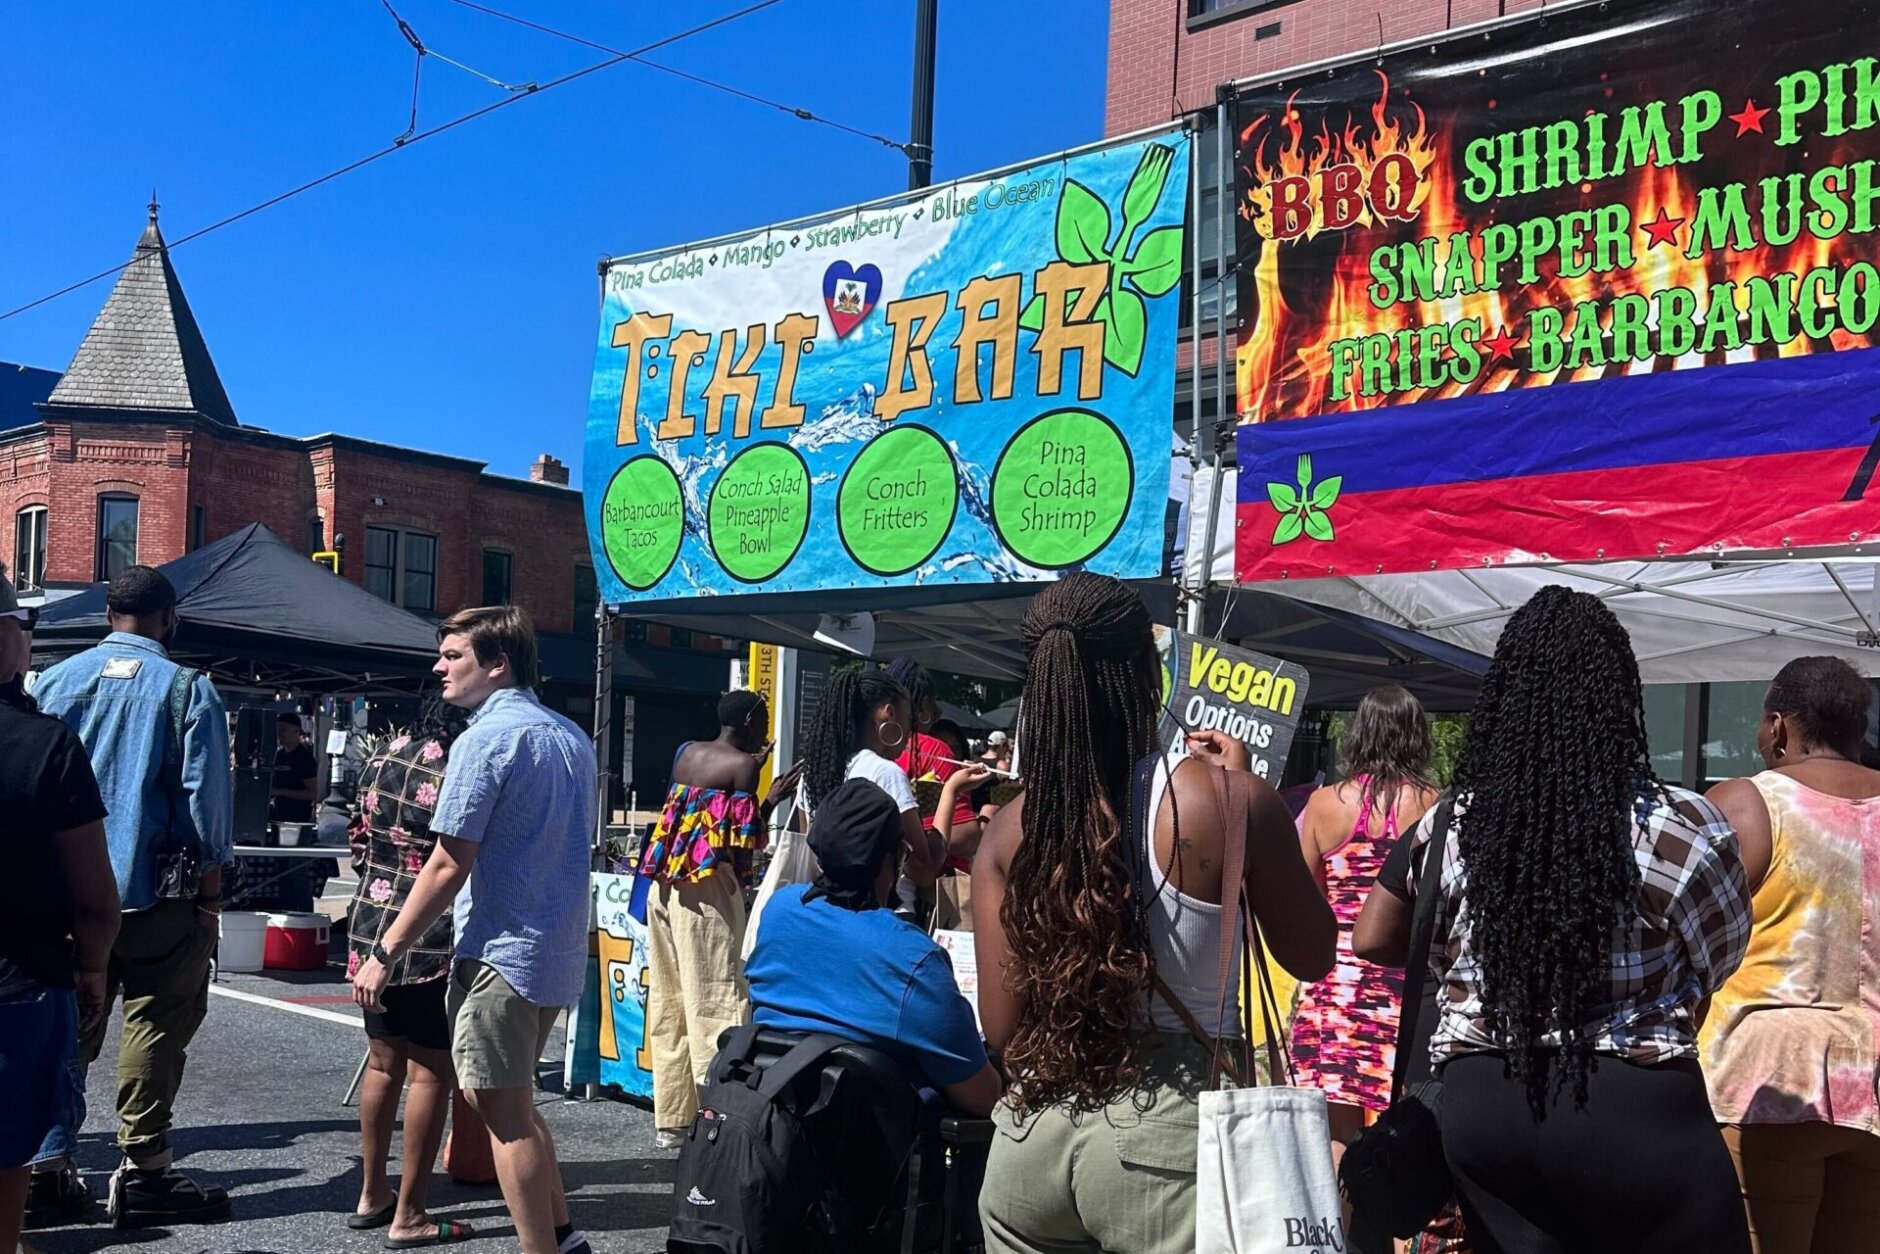 <p>The purpose of the festival is to help local businesses.</p>
<p>Jason Martin, the owner of Sticky Buns on H Street, said this event is the busiest day of the year for his restaurant.</p>
<p>&#8220;If we could have a festival once a month, we would love it,&#8221; Martin said.</p>
